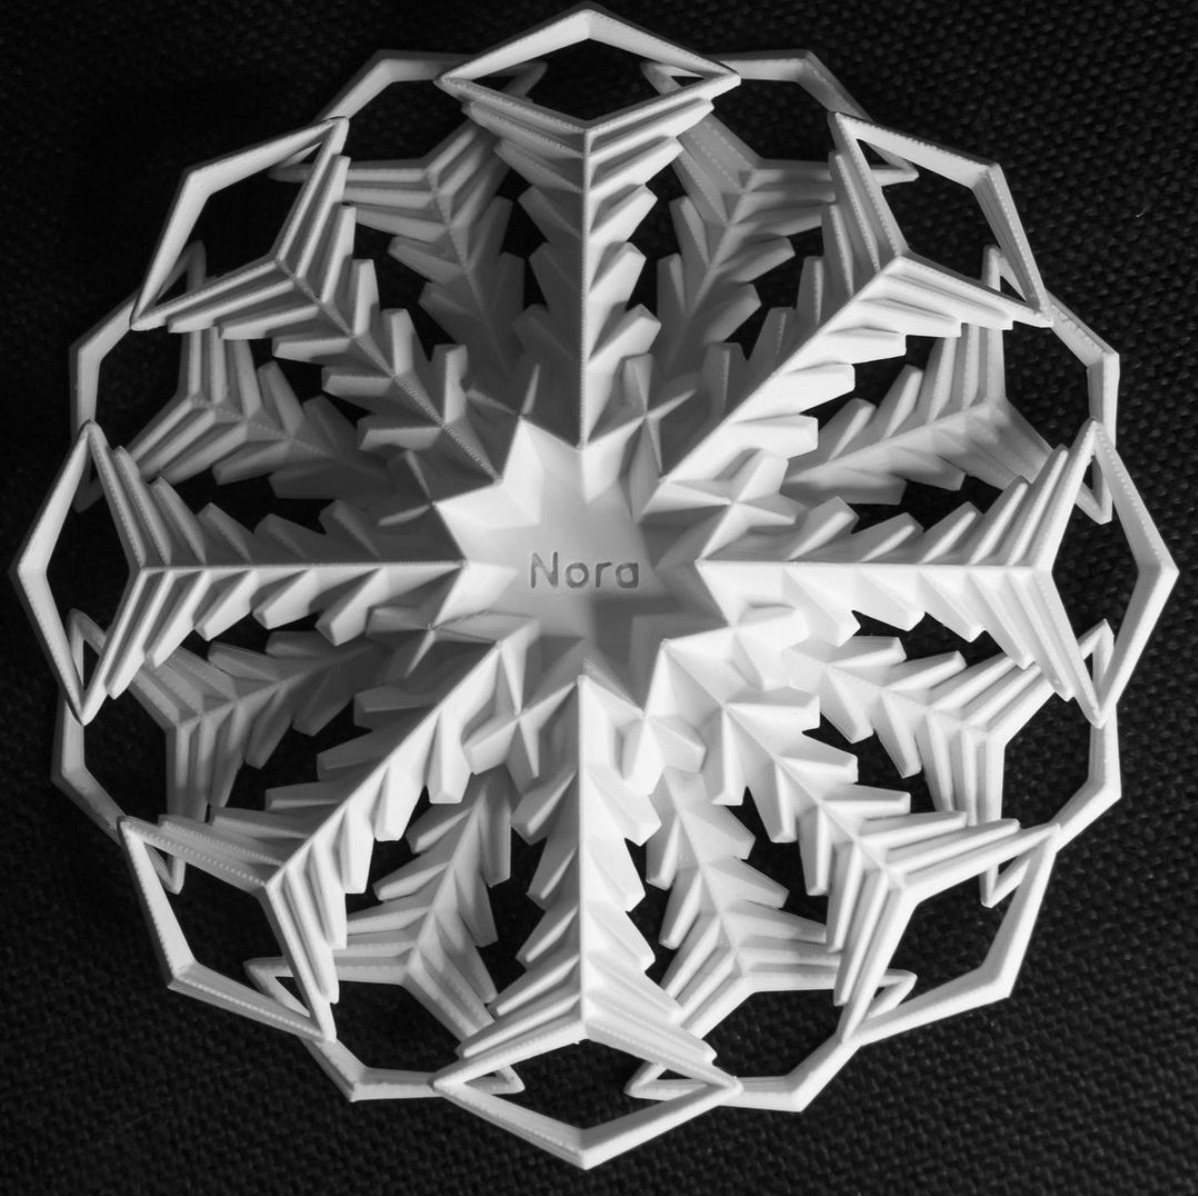 Picture of a 3D printed snowflakes